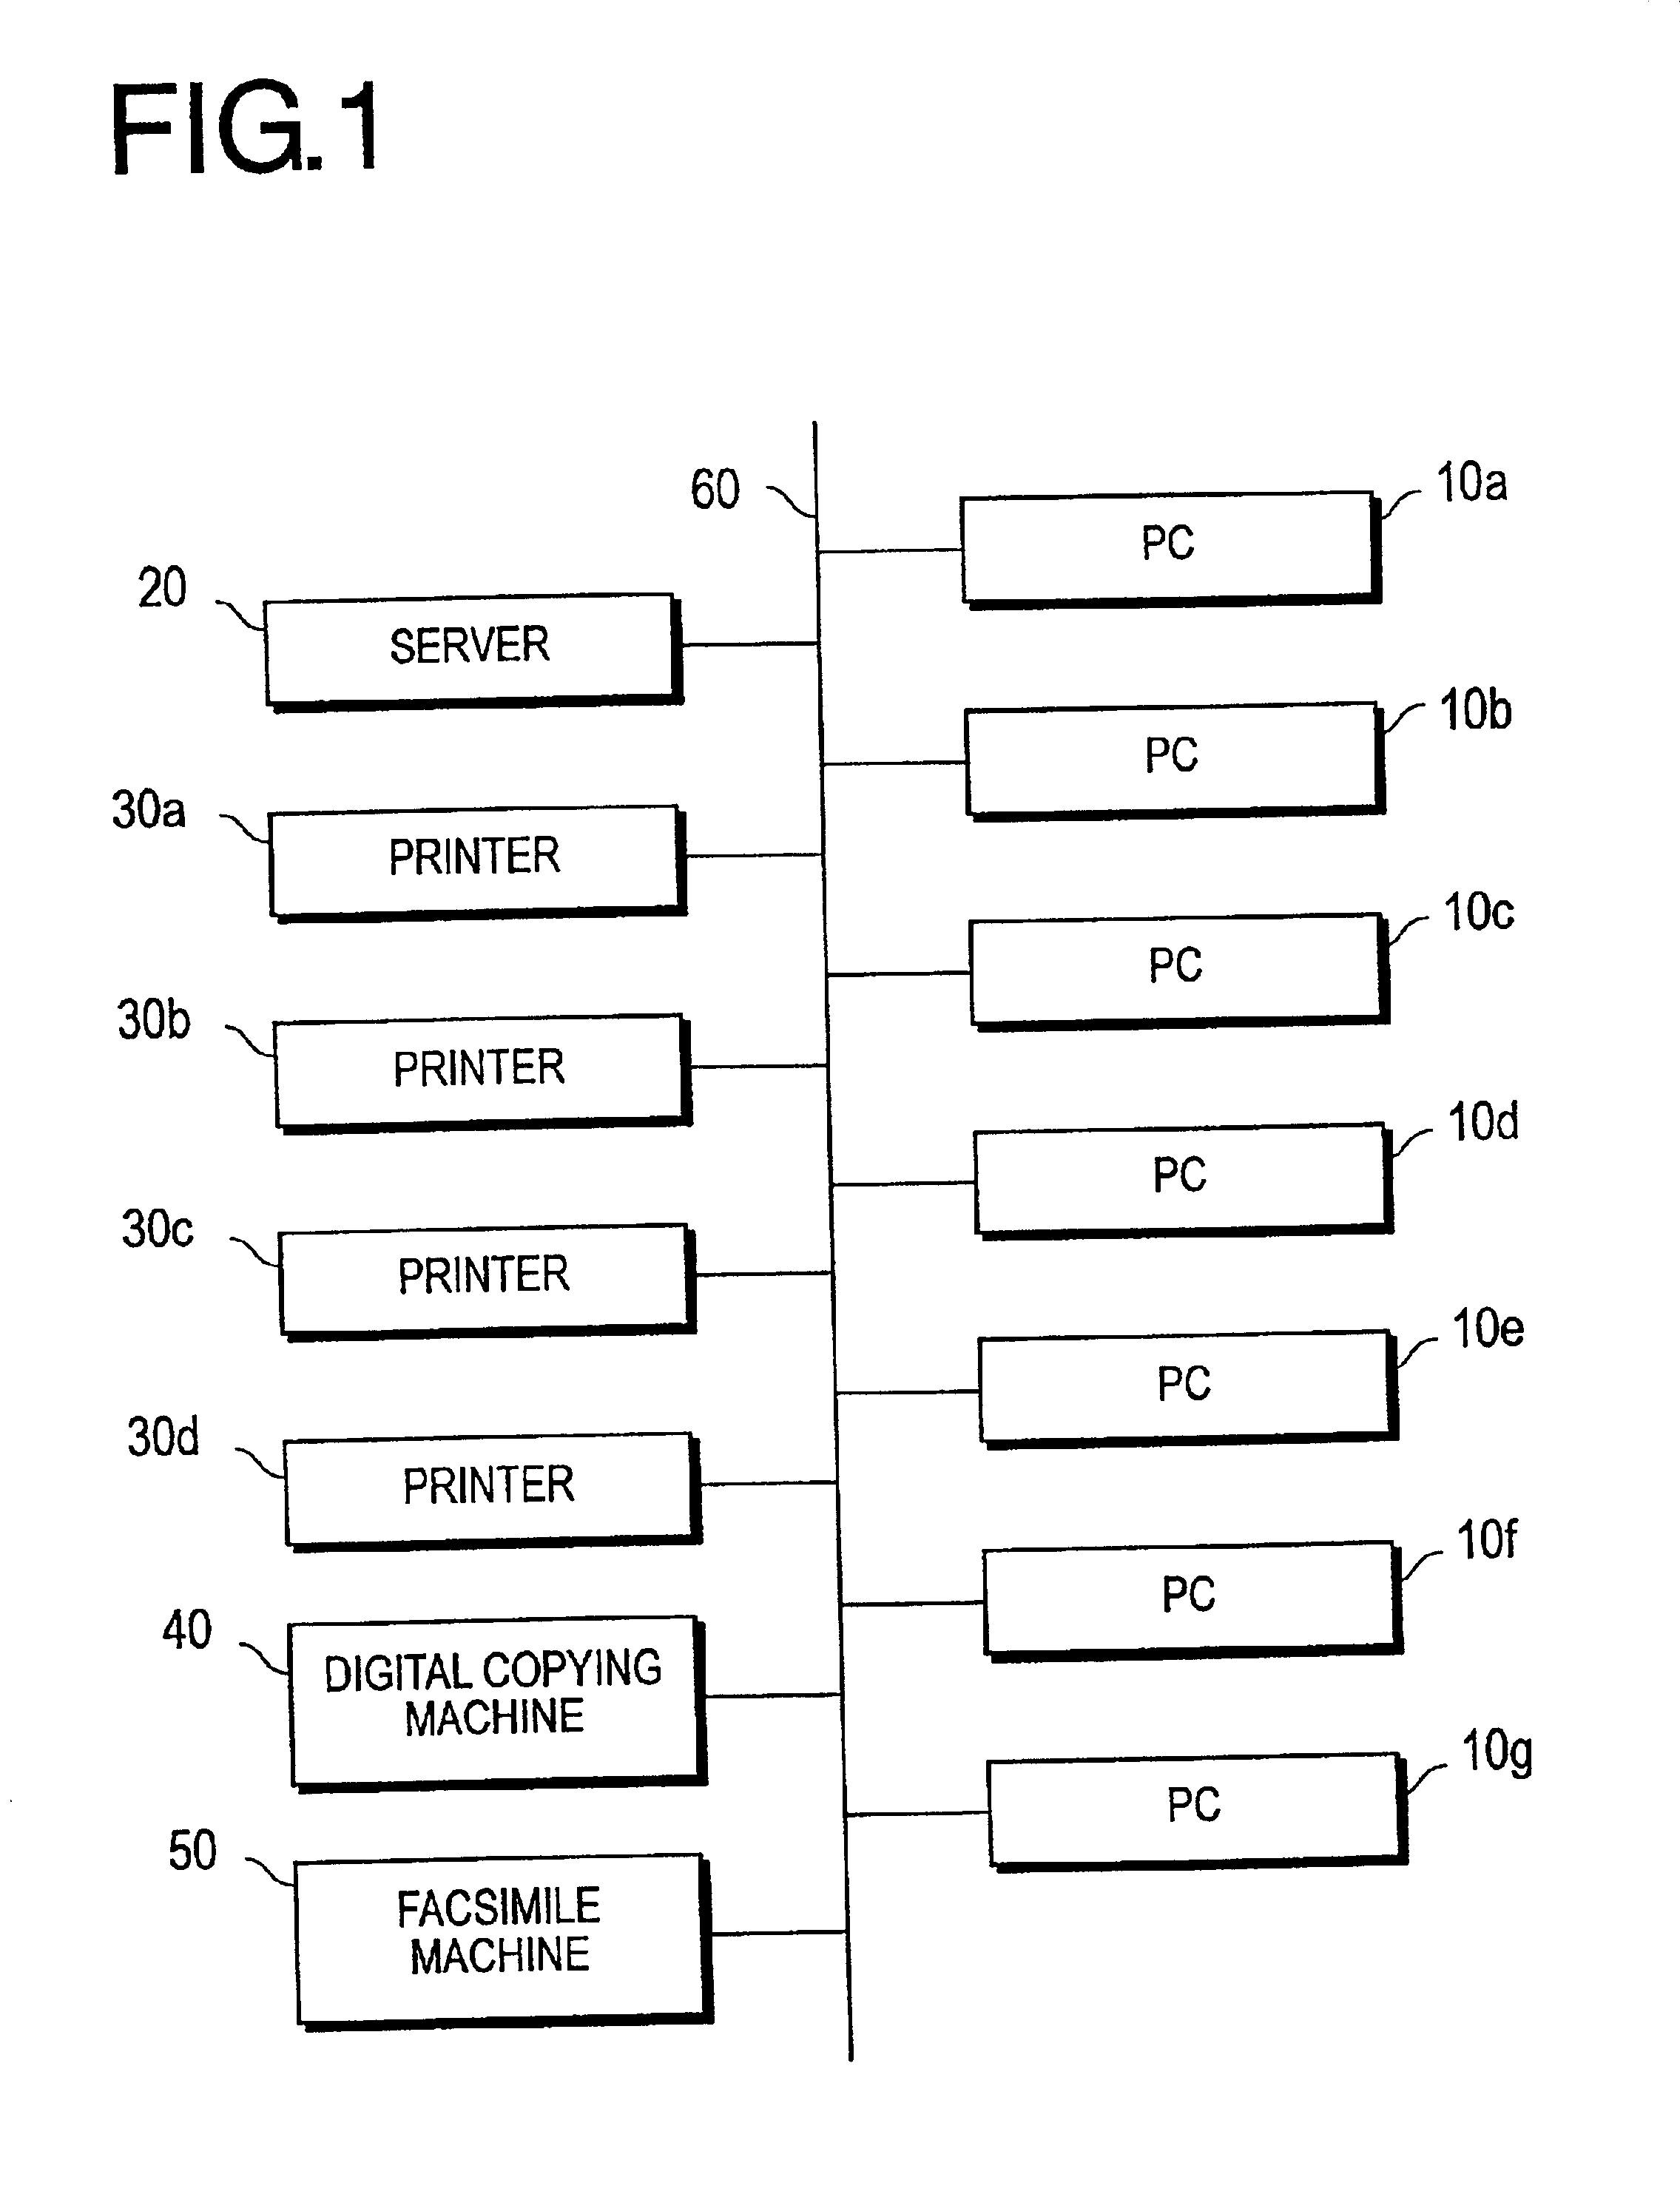 Image forming device, a method of controlling image forming device, and a computer program product for controlling image forming device and providing location information